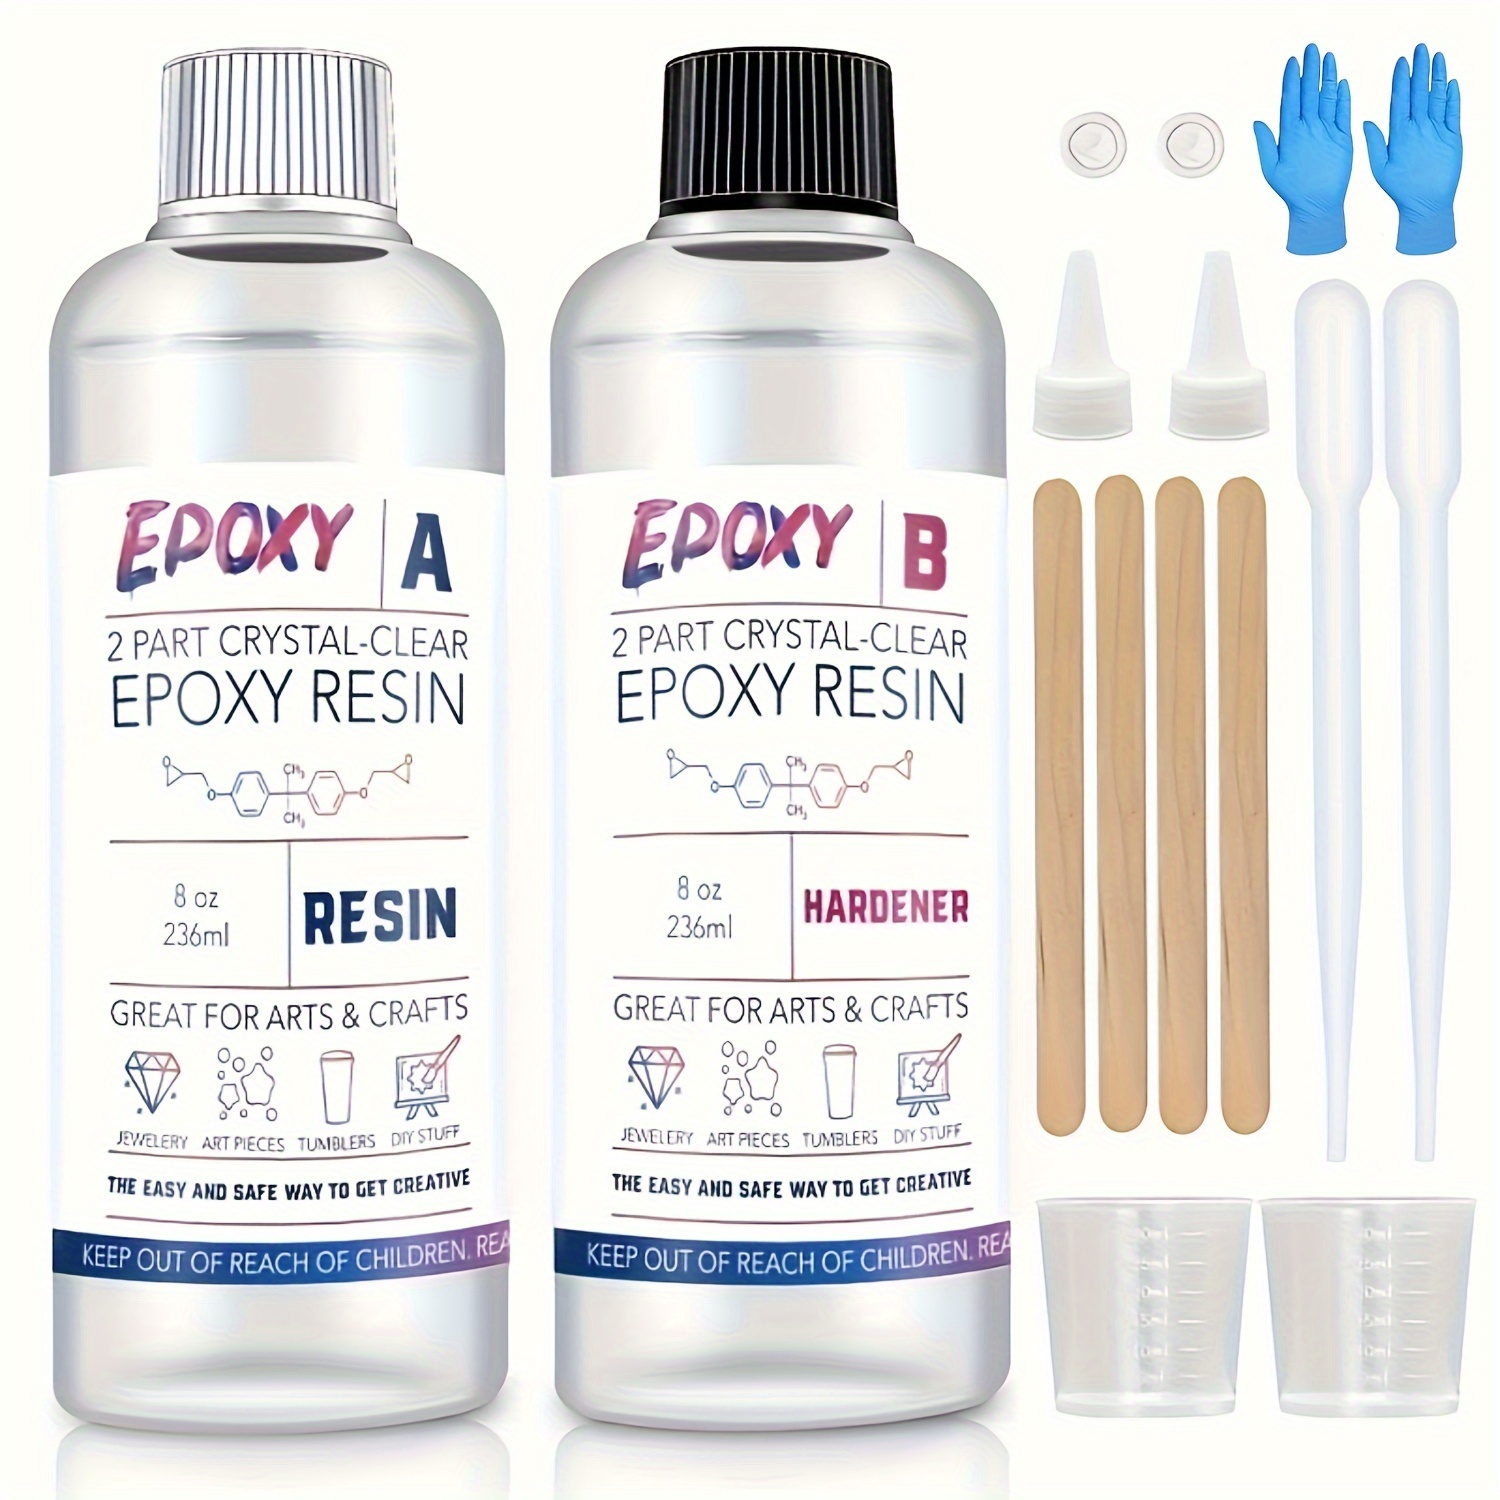 16oz 472ml epoxy resin kit 8oz 236ml a 8oz 236ml b crystal clear liquid epoxy resin for jewelry diy art crafts mold casting kit with bonus 4 sticks 2 measuring cups 2 pairs gloves 2 droppers and detailed instructions perfect starter kit for beginners